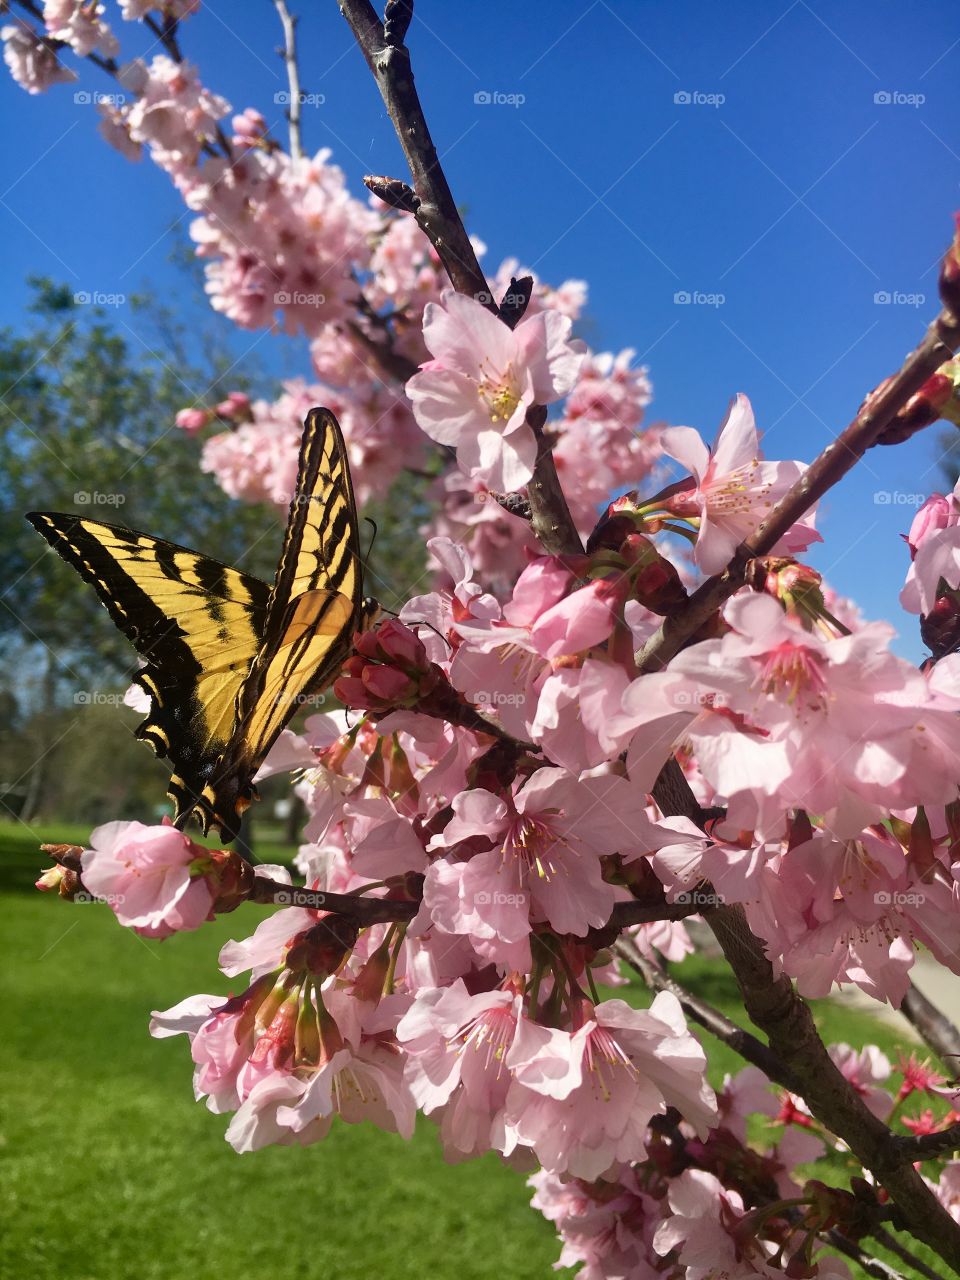 Butterfly and Cherry Blossoms